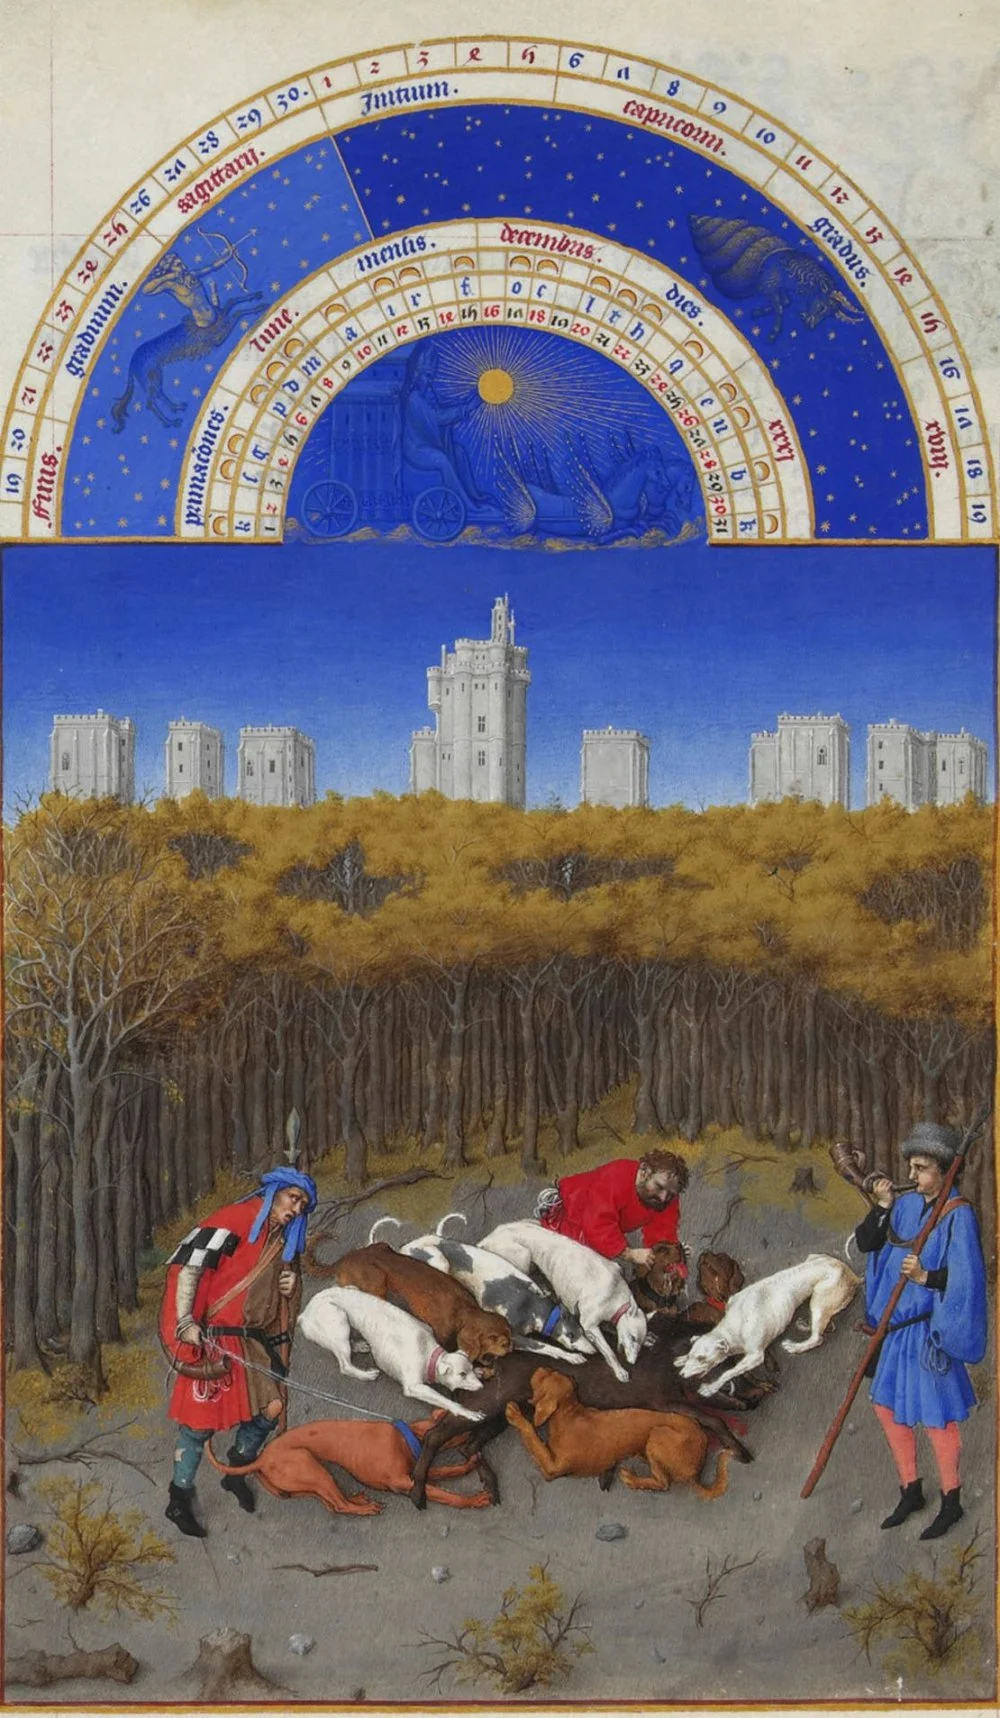 Limbourg brothers. December: Wild boar hunting. A book of hours of the Duke of Berry. 1410-1490s/Wikimedia Commons